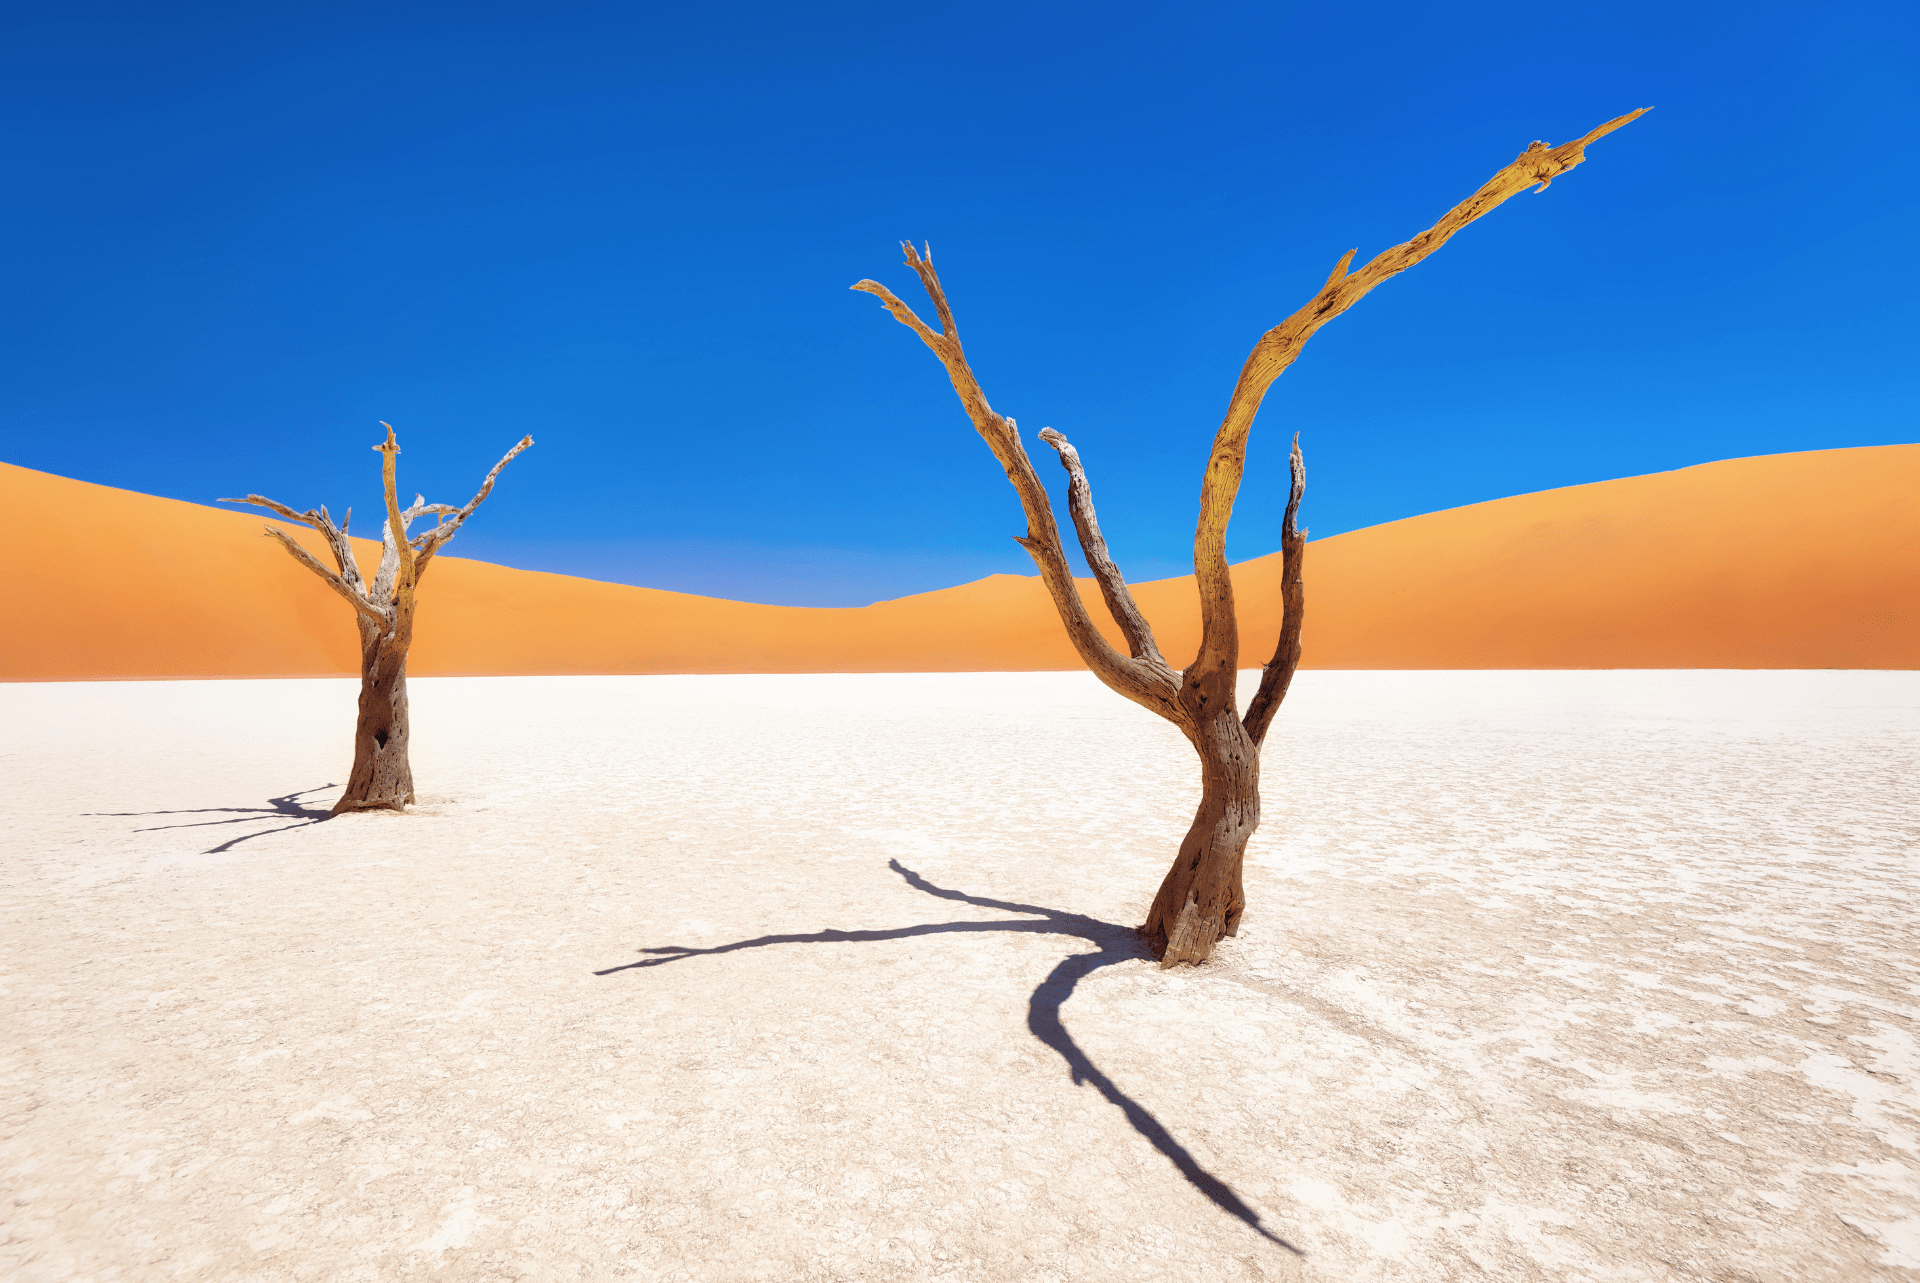 Namibia Travel Guide